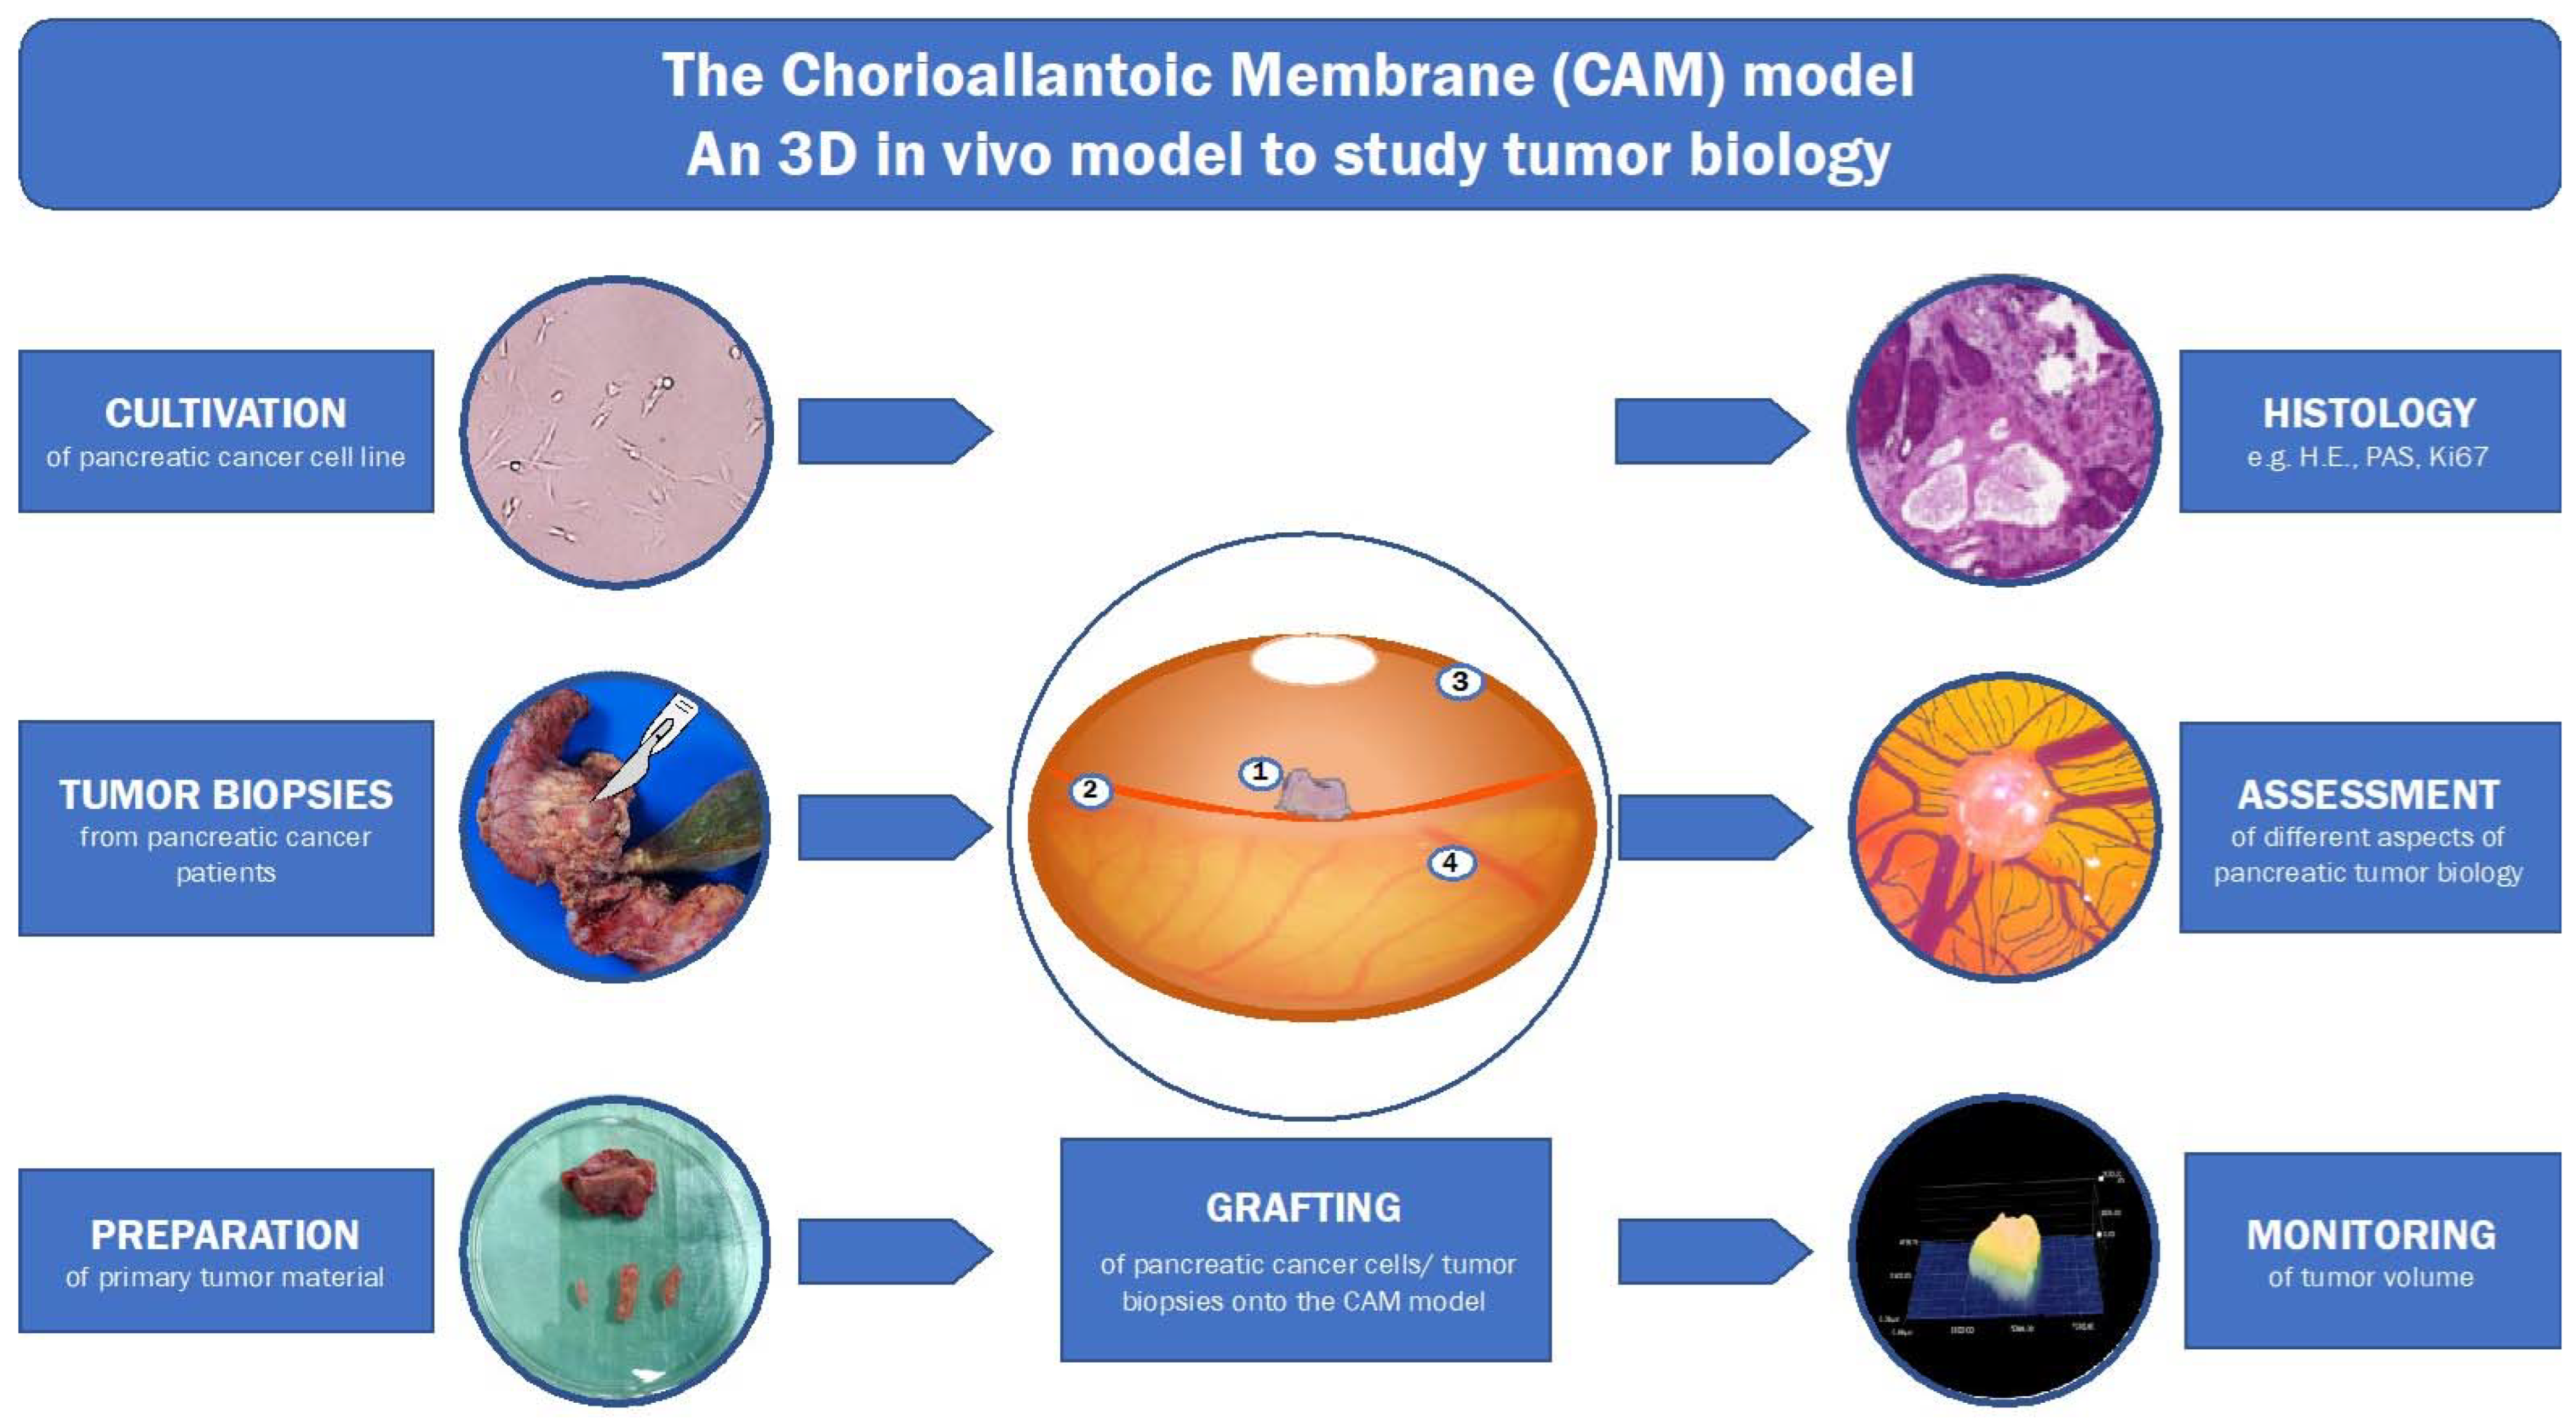 Ashley Furman vasthouden Zijdelings Cancers | Free Full-Text | 3D In Vivo Models for Translational Research on  Pancreatic Cancer: The Chorioallantoic Membrane (CAM) Model